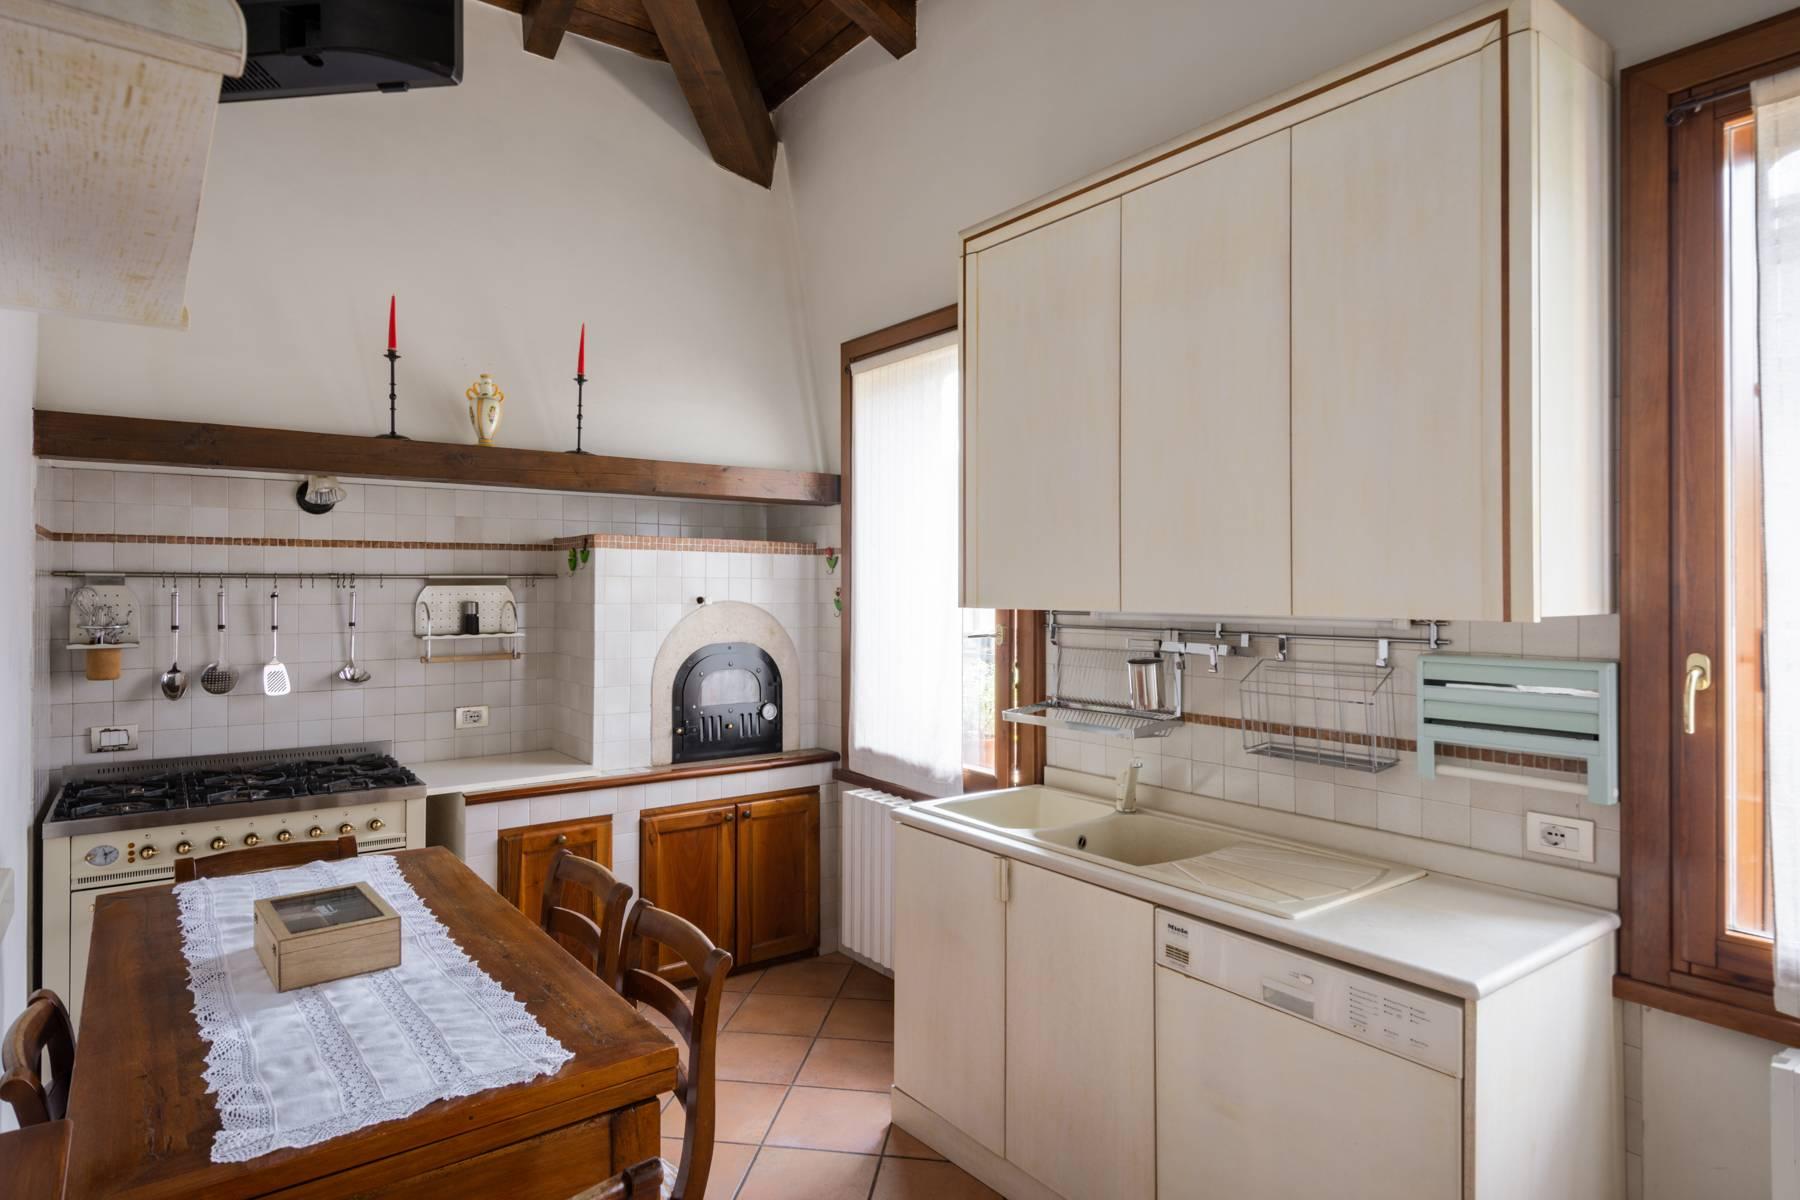 Stunning penthouse in Villa just few minutes from Verona's historic center - 5